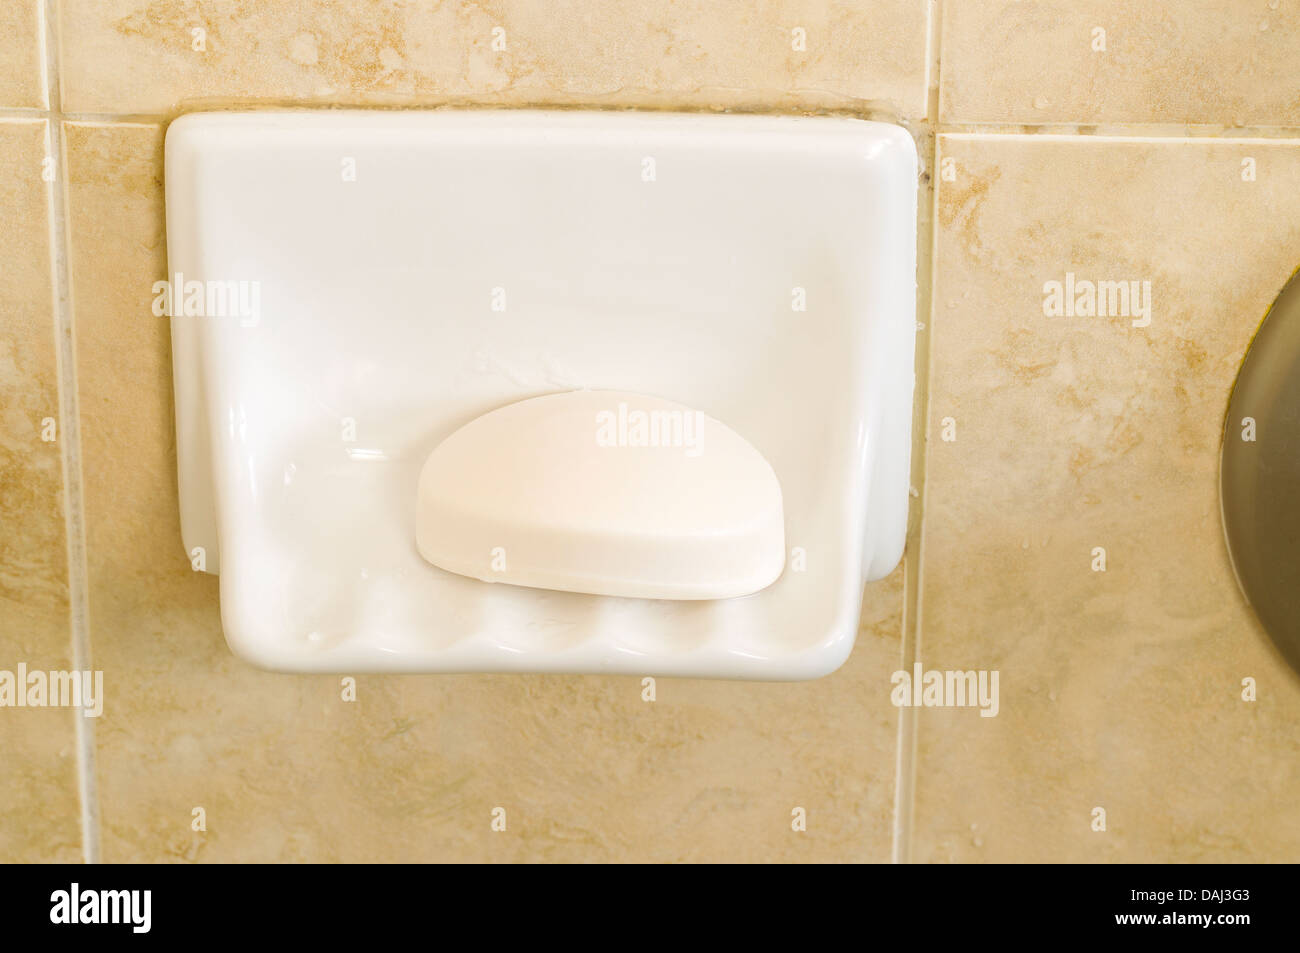 Horizontal photo of a white soap in shower stall dish with tiles in background Stock Photo